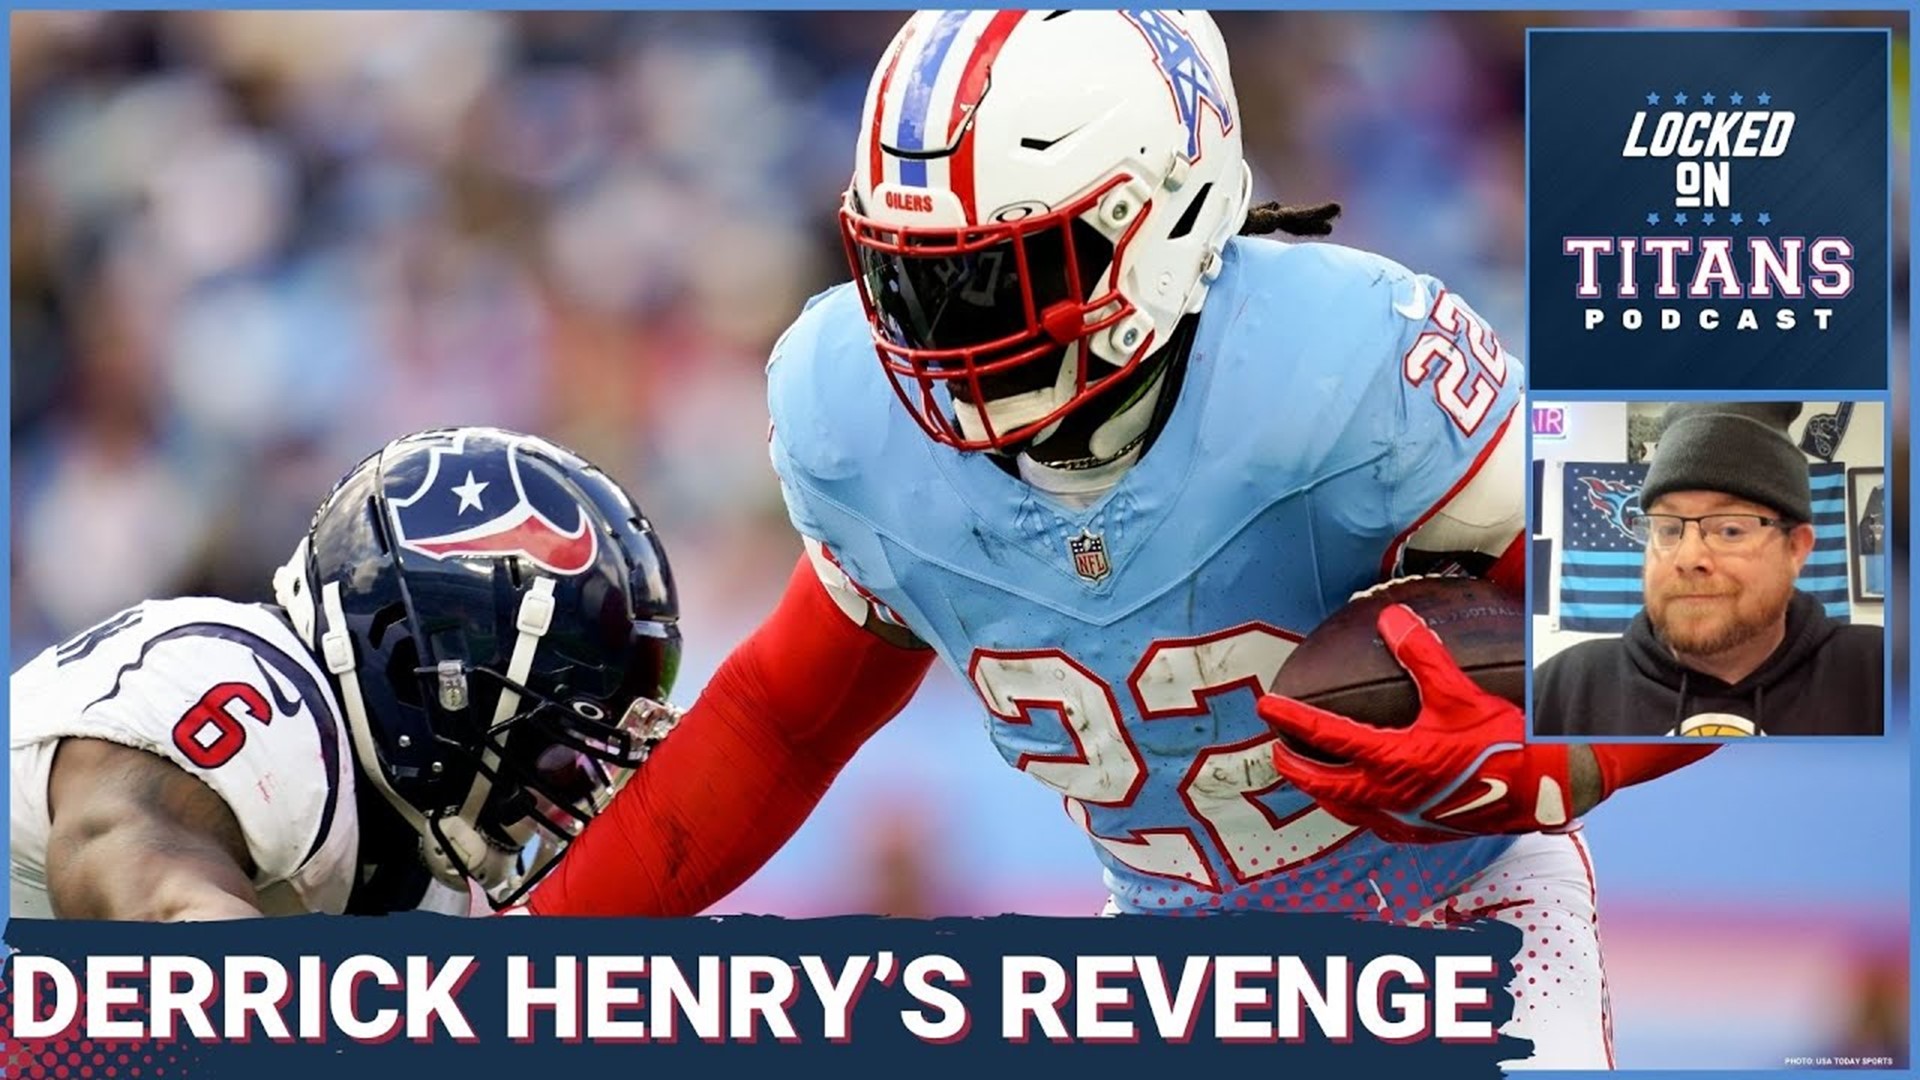 The Tennessee Titans take on the Houston Texans in their second matchup of the season and Derrick Henry must have a better game if the Titans hope to have a shot